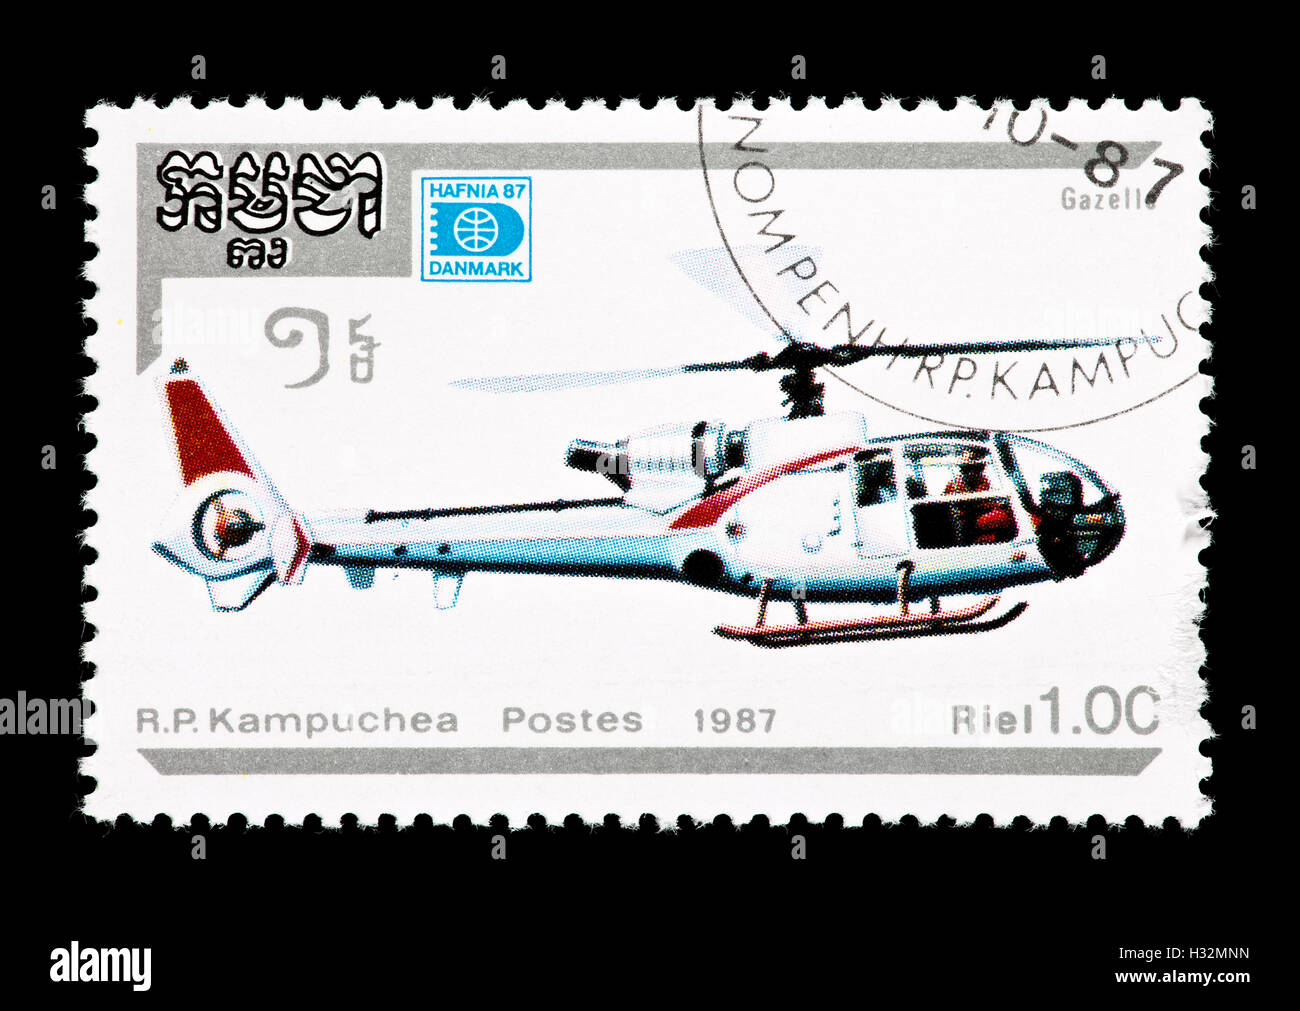 Postage stamp from Cambodia (Kampuchea) depicting a Sud Aviation Gazelle. Stock Photo